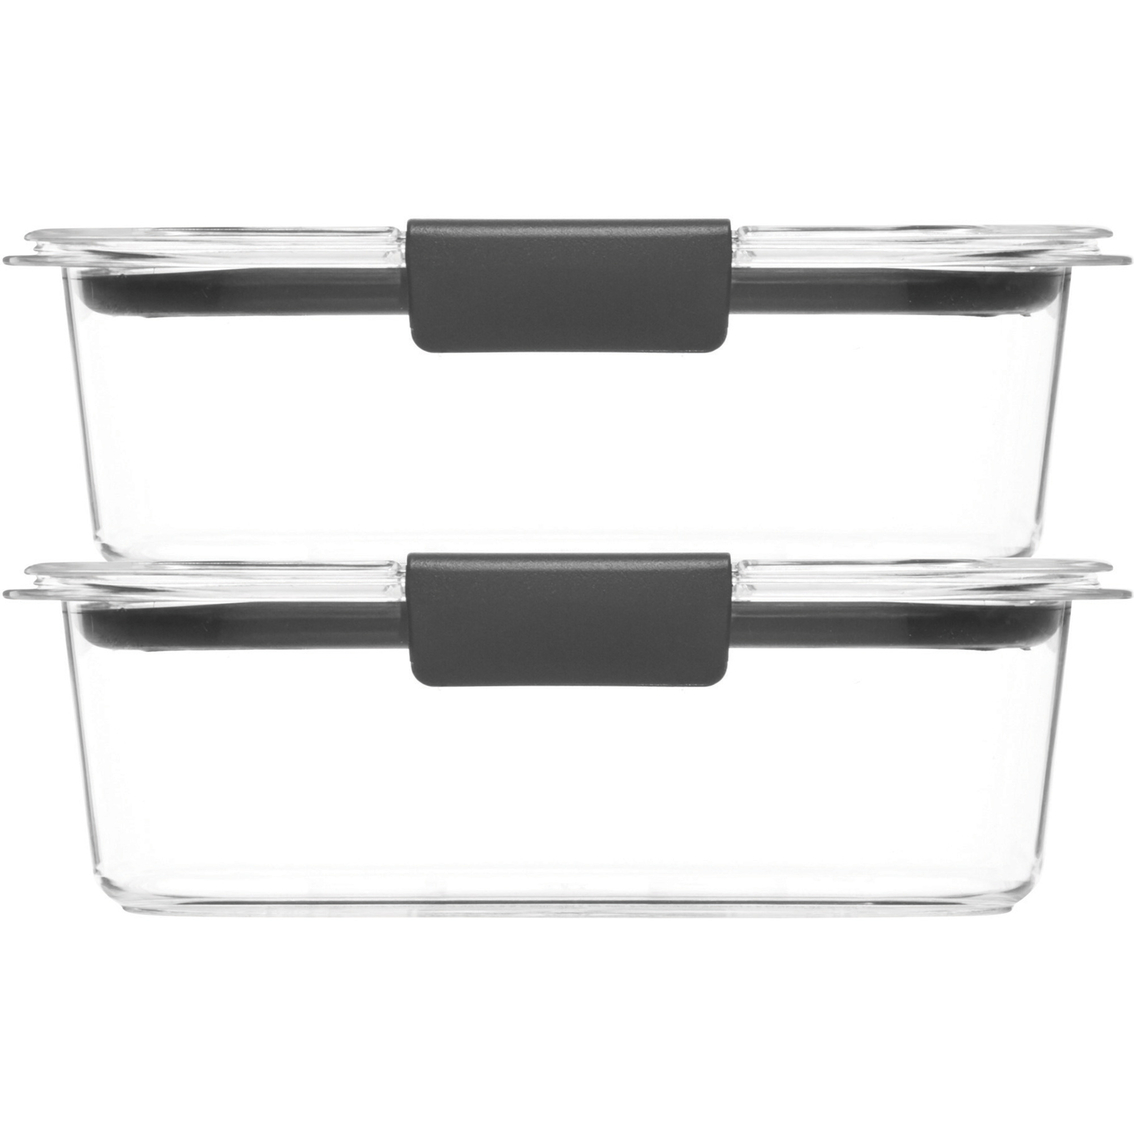 Rubbermaid Brilliance 3.2 C. Clear Rectangle Food Storage